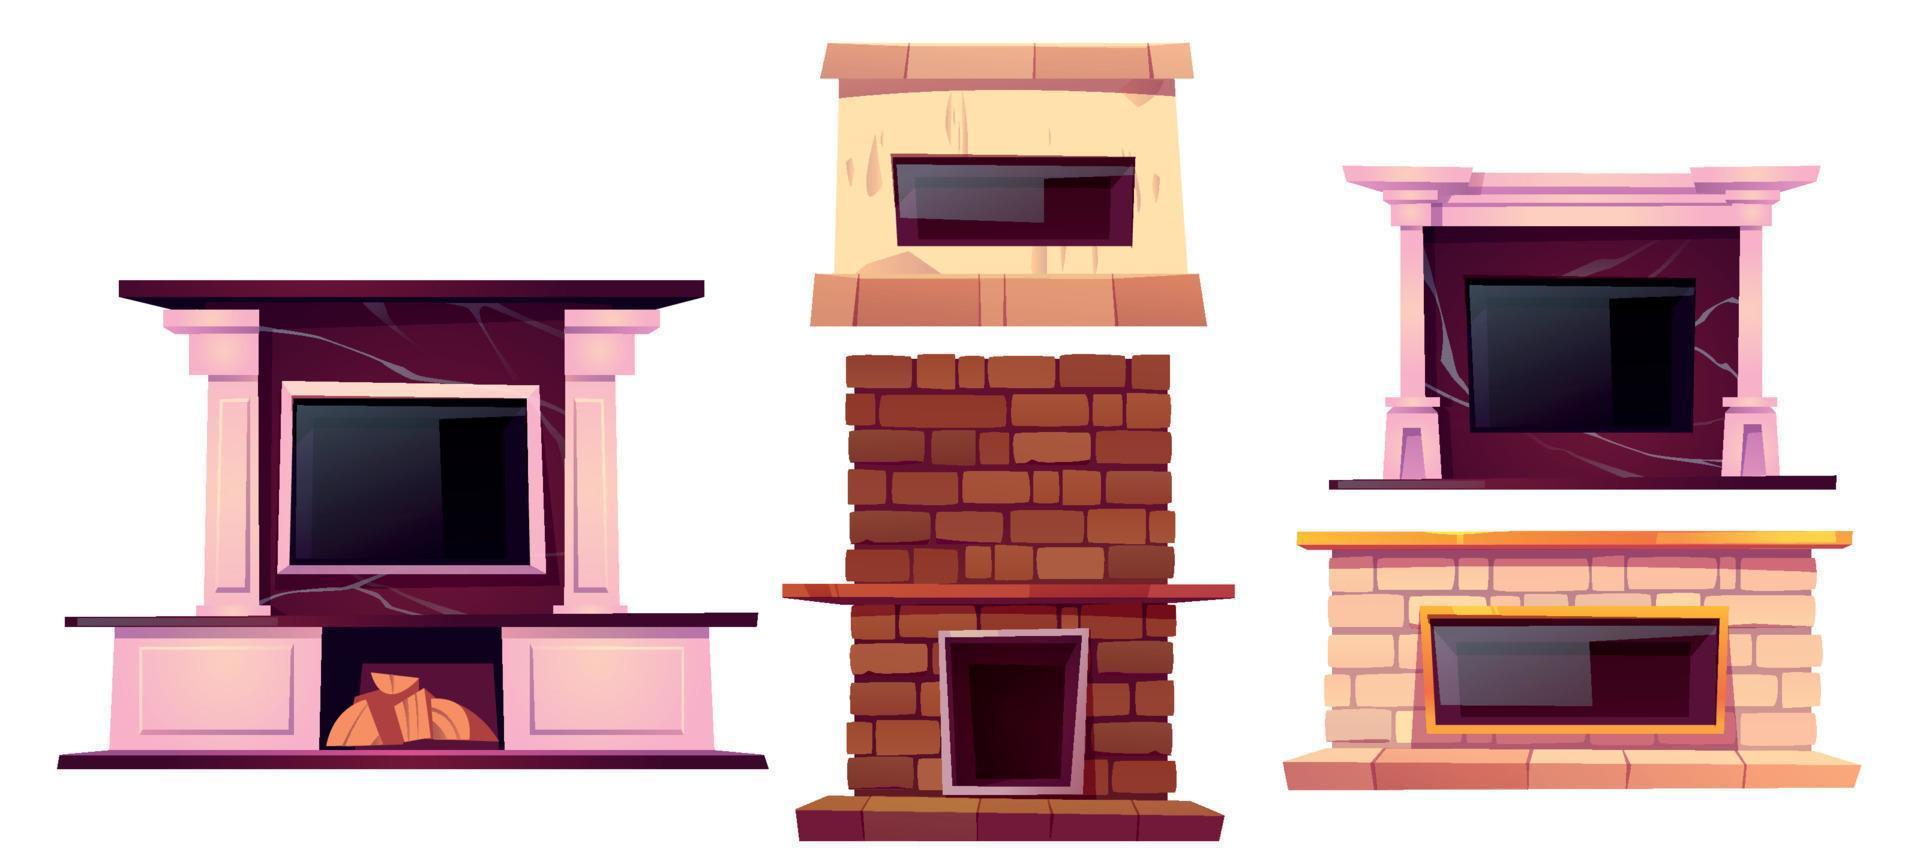 Fireplace, home interior chimneys, heating system vector